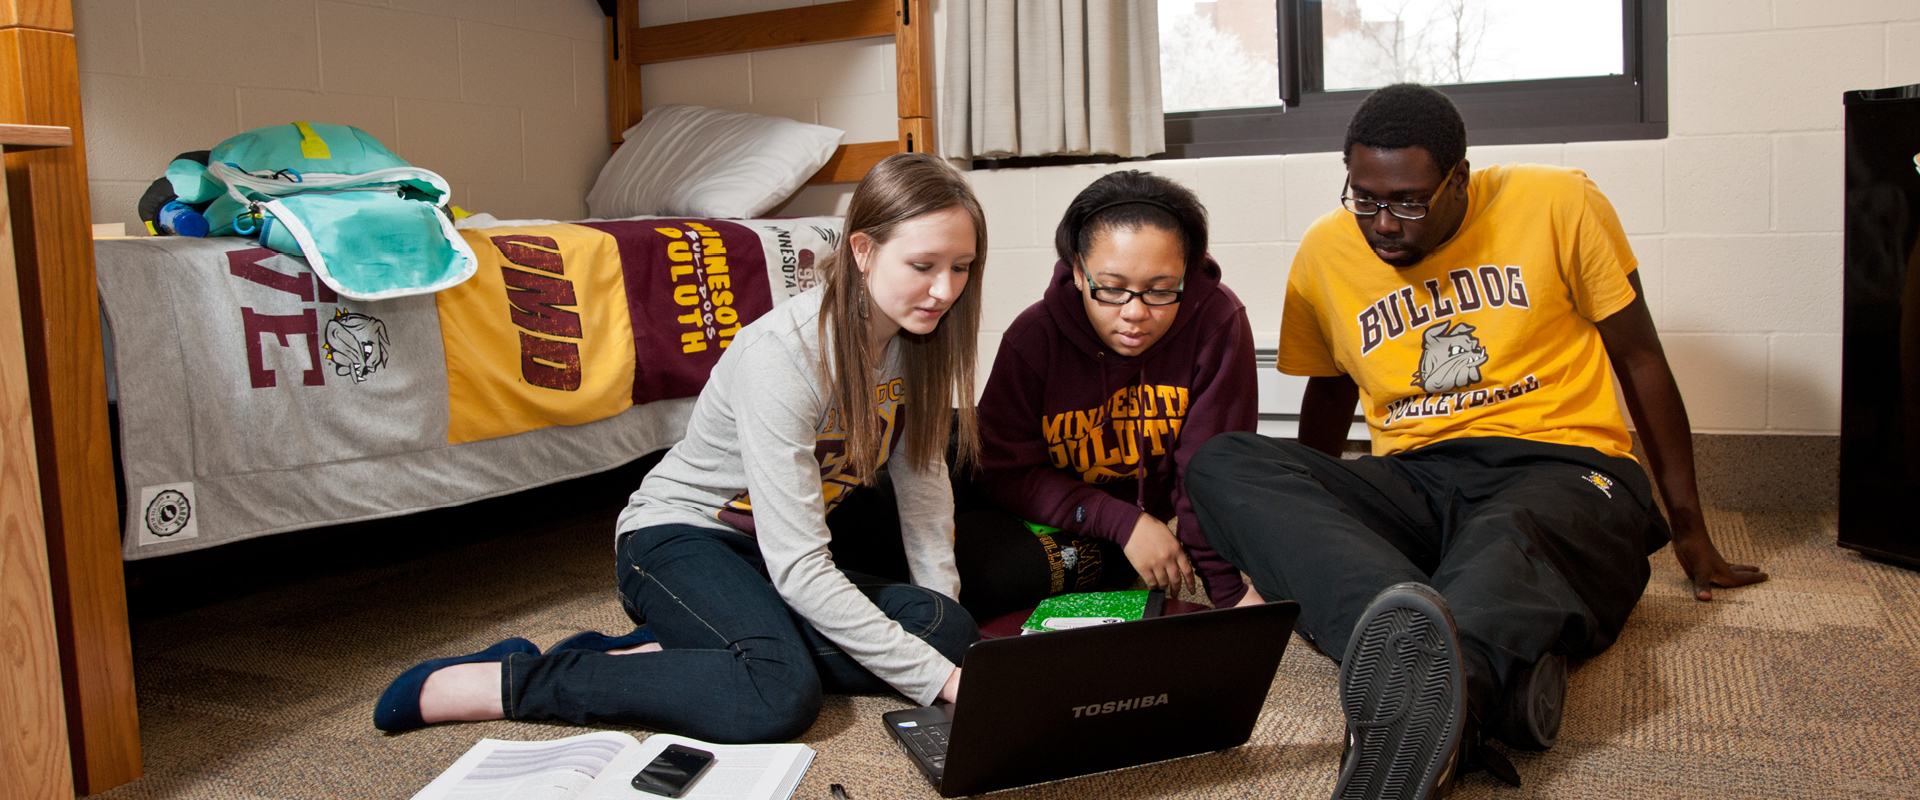 Students gathered in a dorm room doing homework